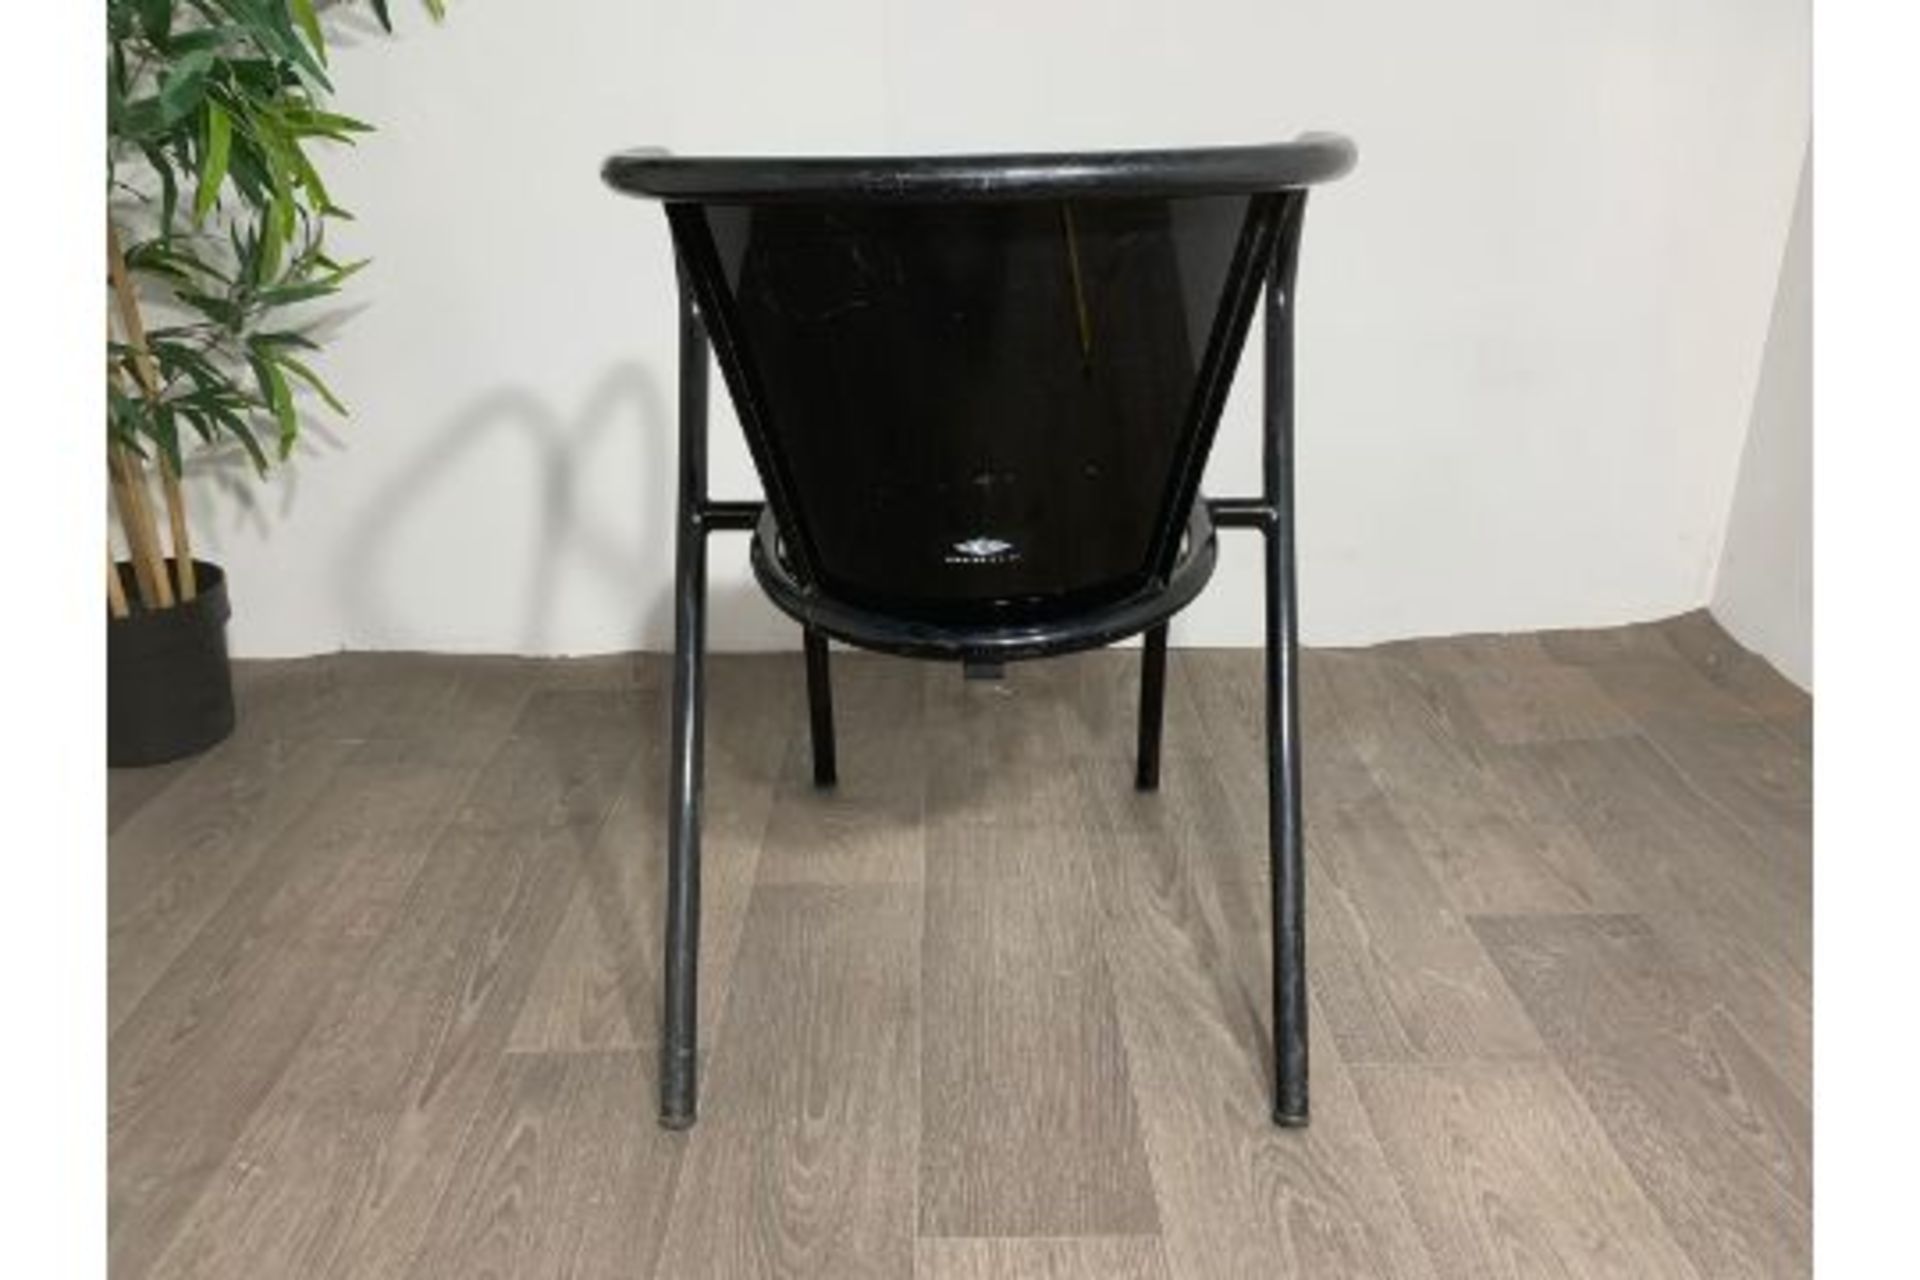 Adico 5008 Black Chair With Wooden Seat x2 - Image 3 of 7